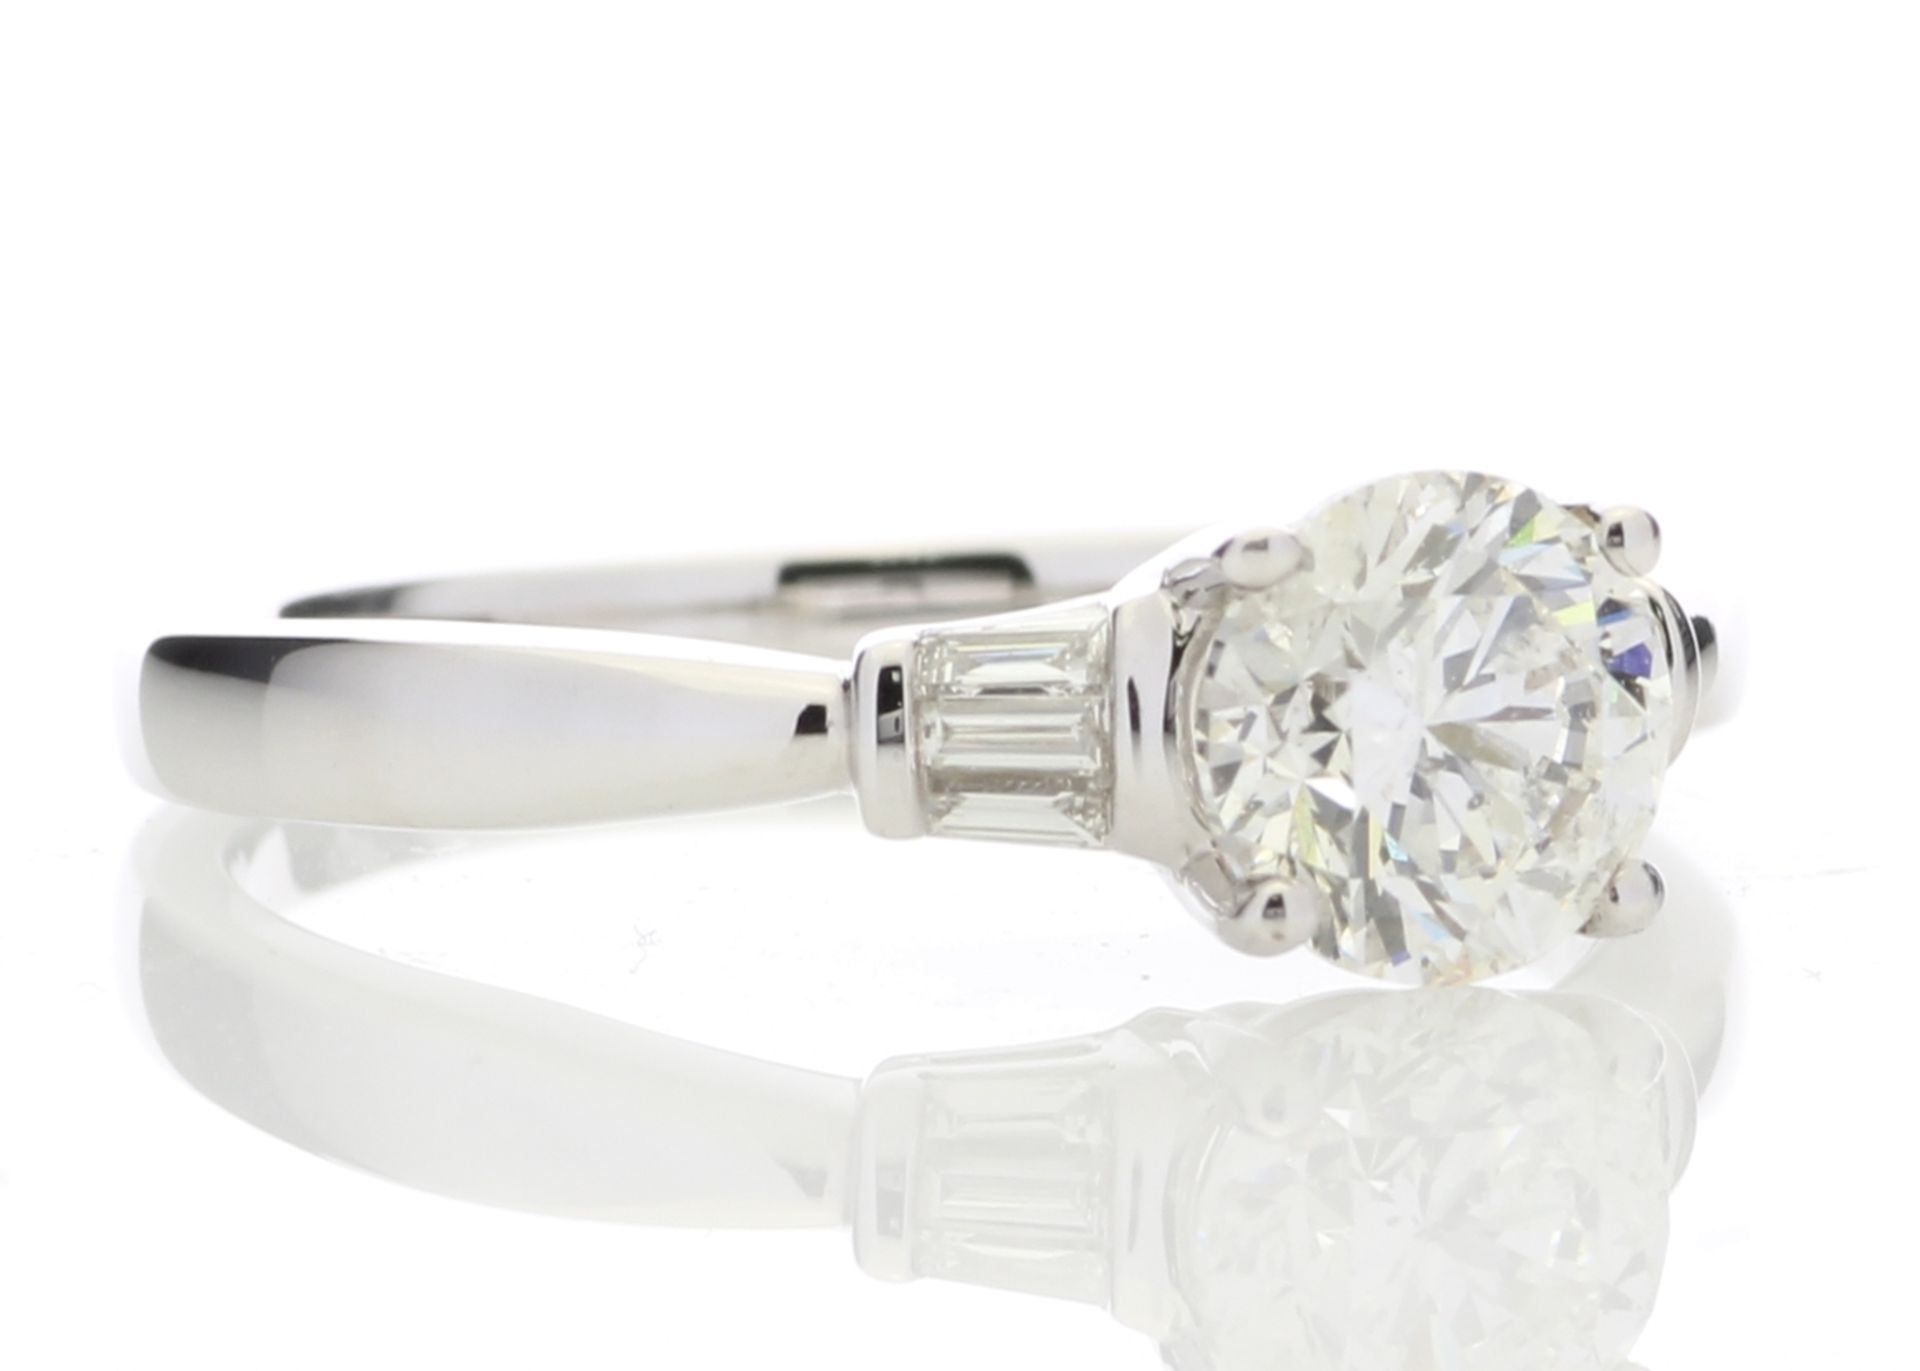 18ct White Gold Single Stone Diamond Ring With Baguette (1.02) 1.15 Carats - Valued by GIE £37,300. - Image 4 of 5